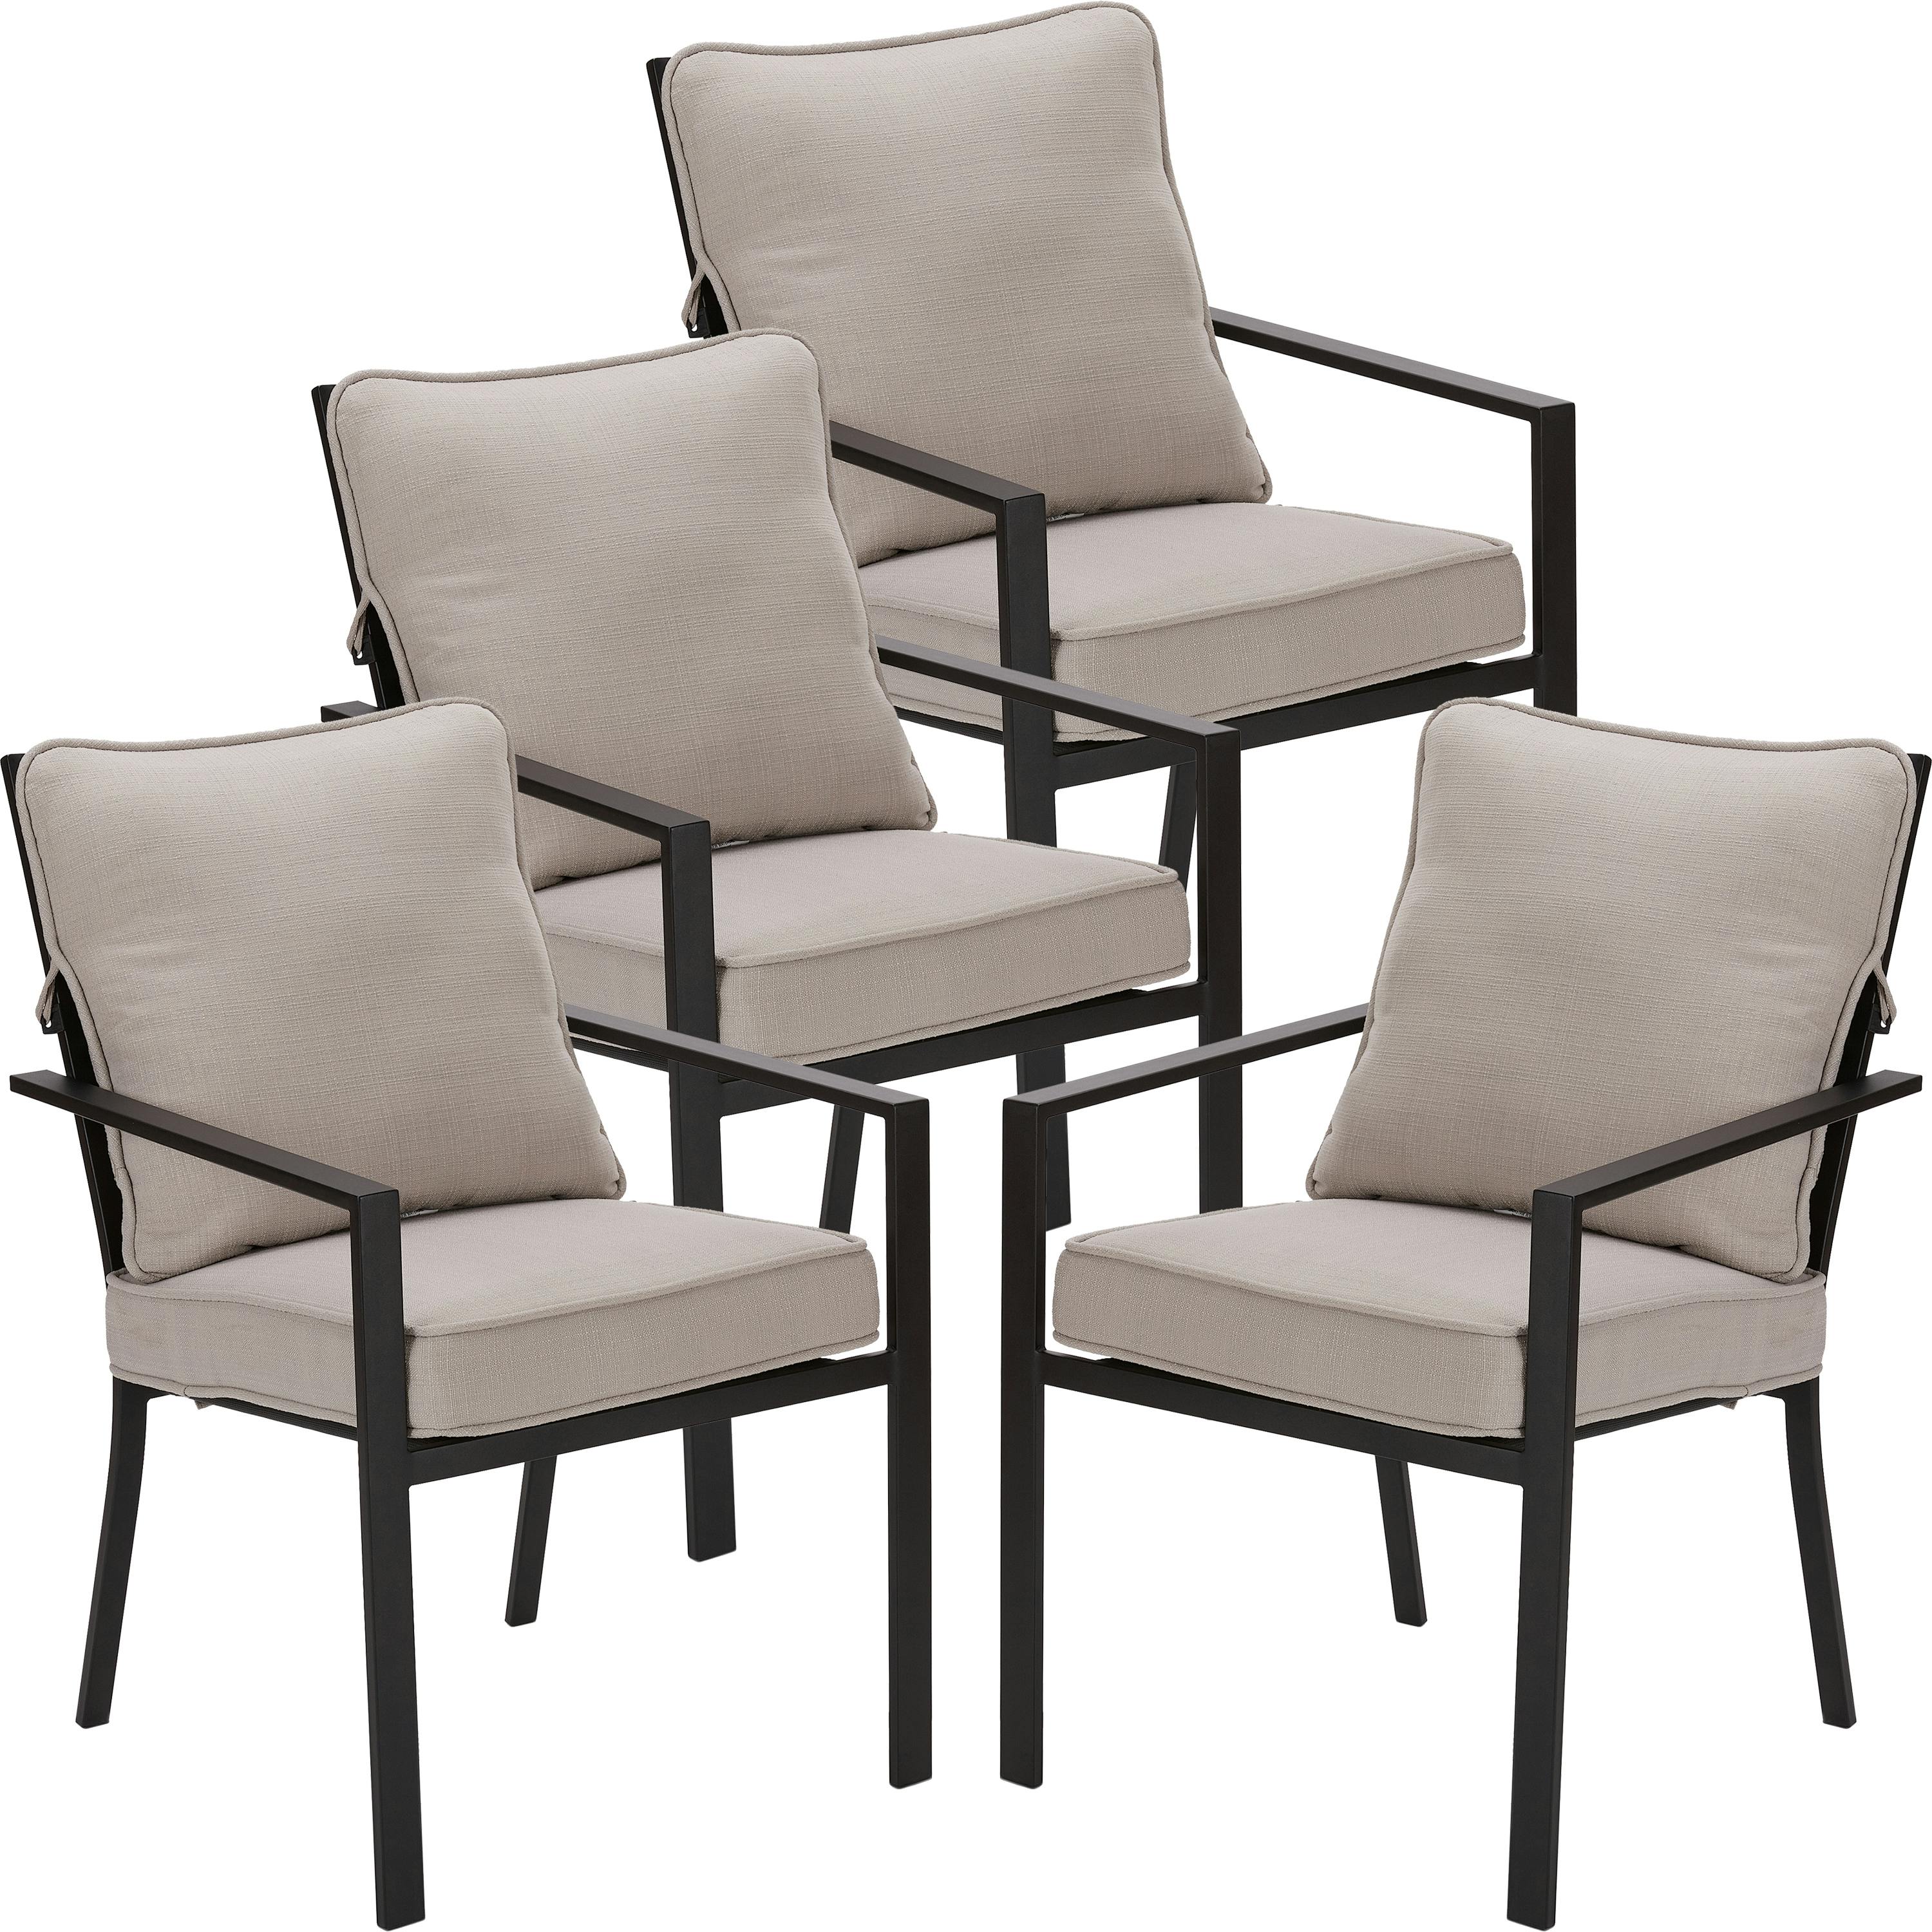 clearance patio sets as low as 57 at walmart  the krazy